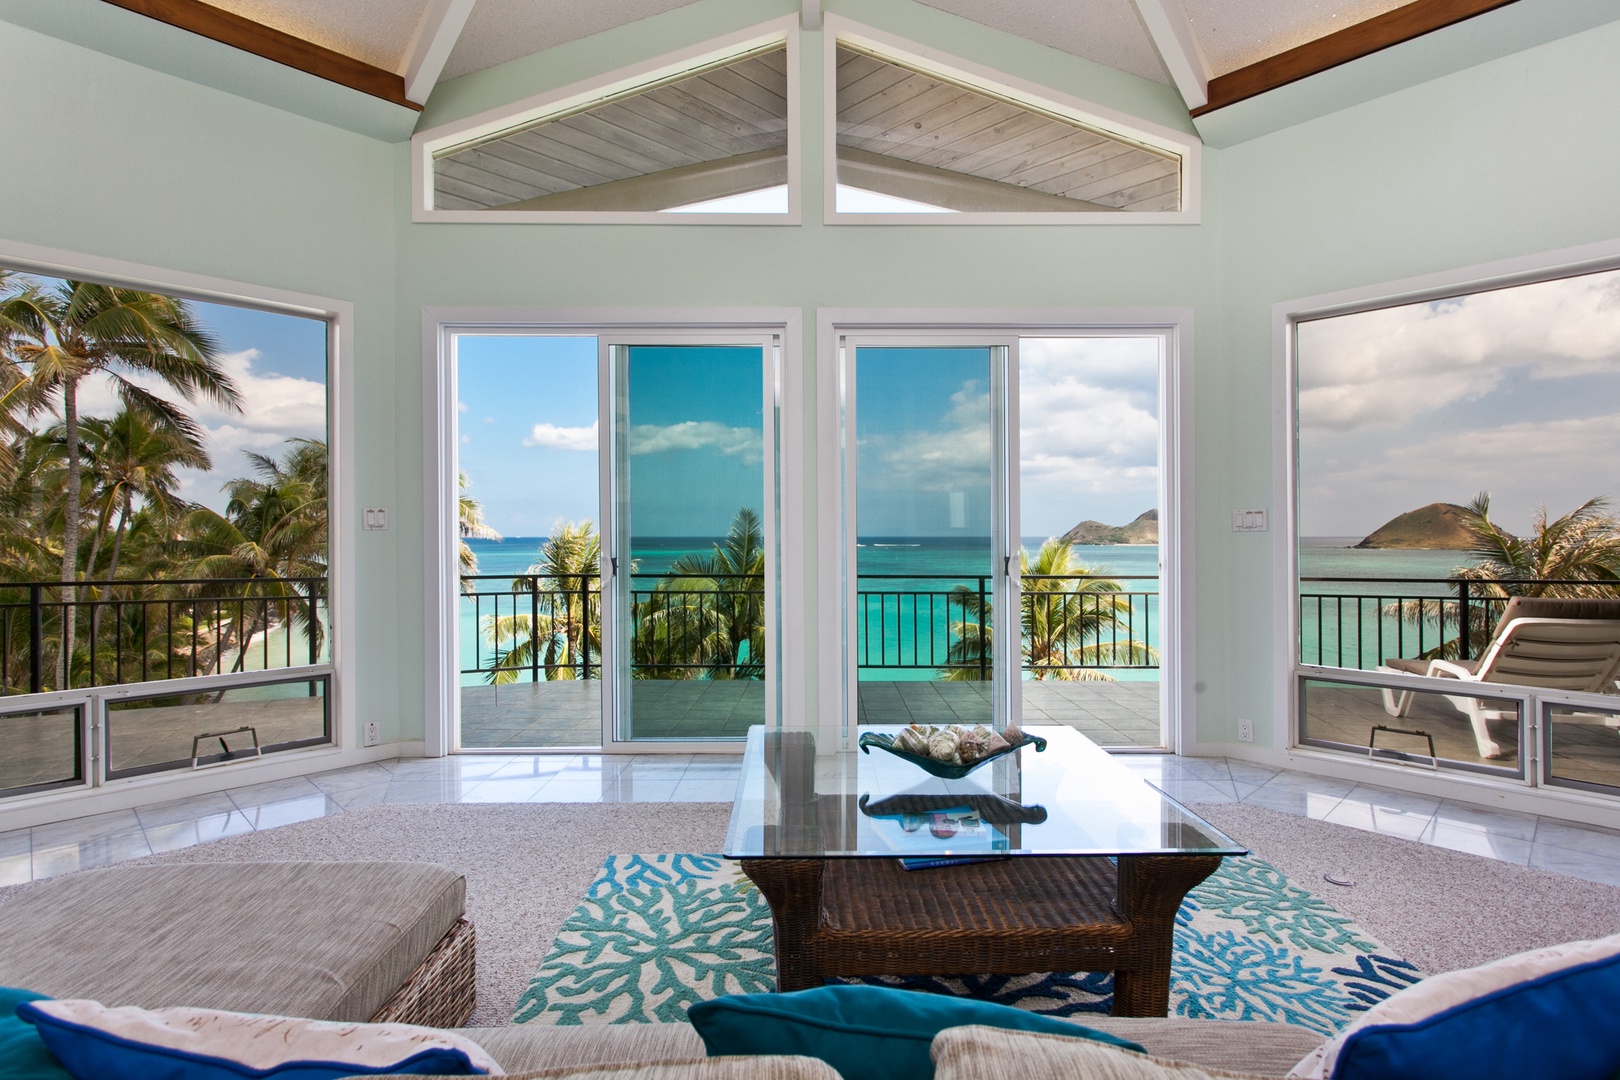 Kailua Vacation Rentals, Hale Kolea* - Oceanfront serenity meets modern comfort in this bright haven with unobstructed views.